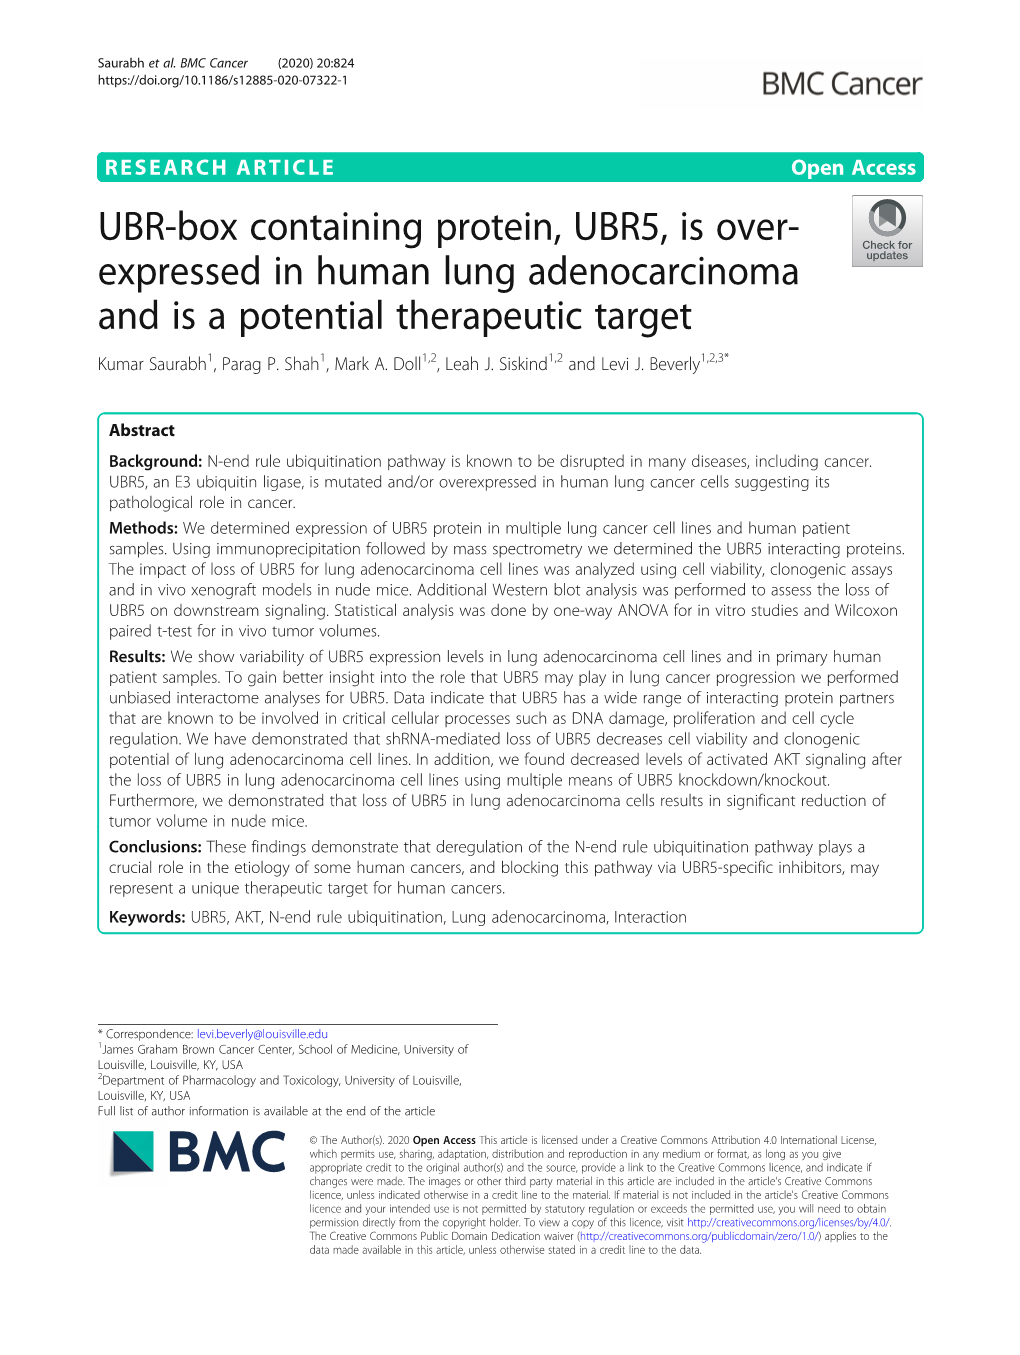 UBR-Box Containing Protein, UBR5, Is Over-Expressed In